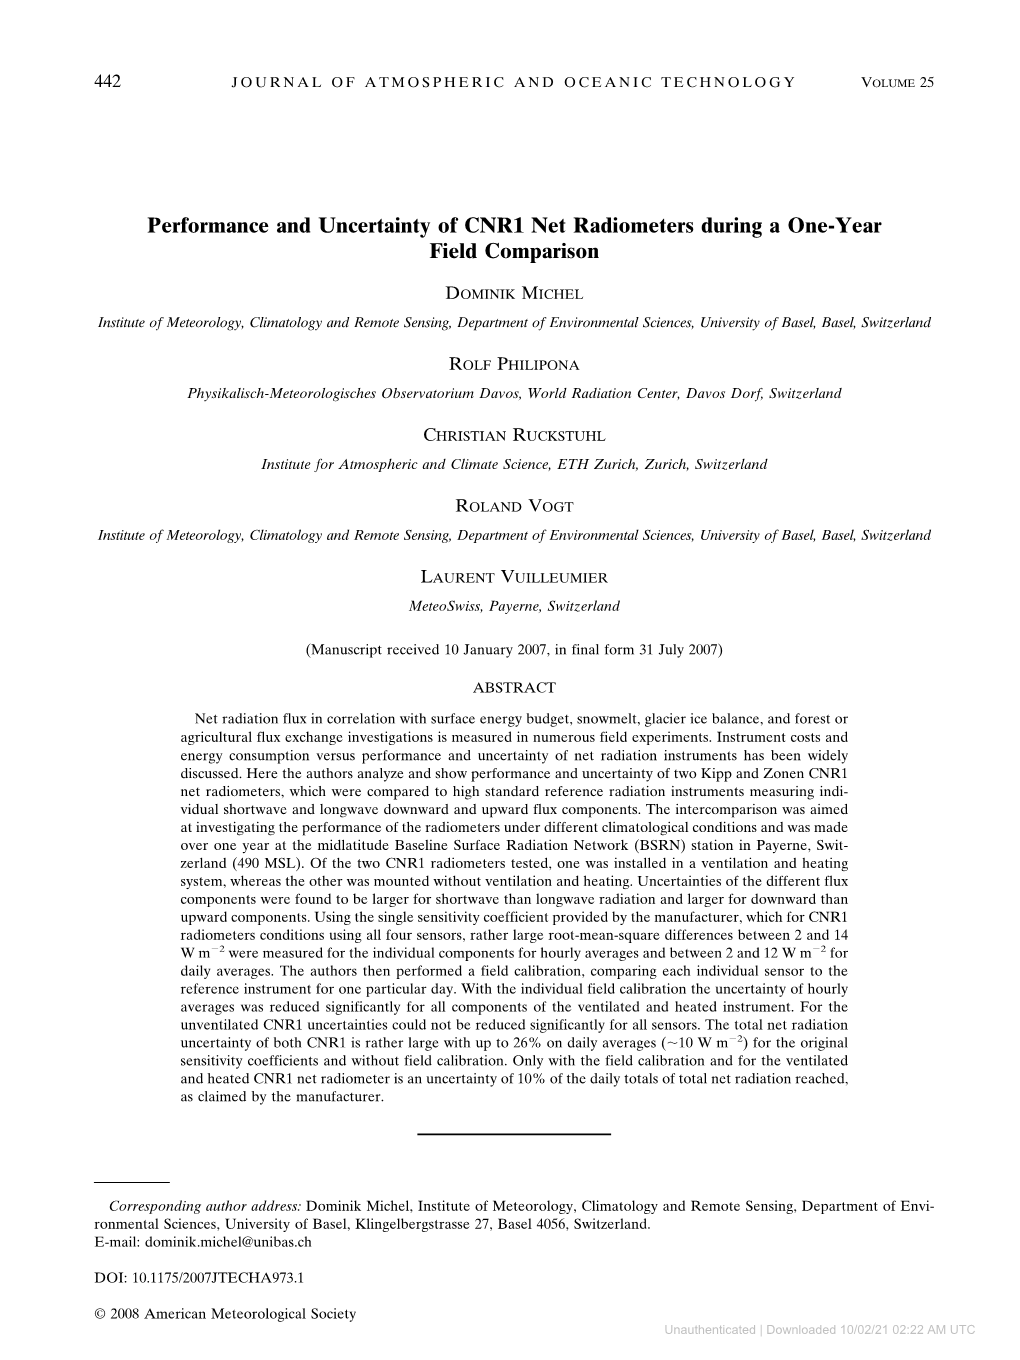 Performance and Uncertainty of CNR1 Net Radiometers During a One-Year Field Comparison